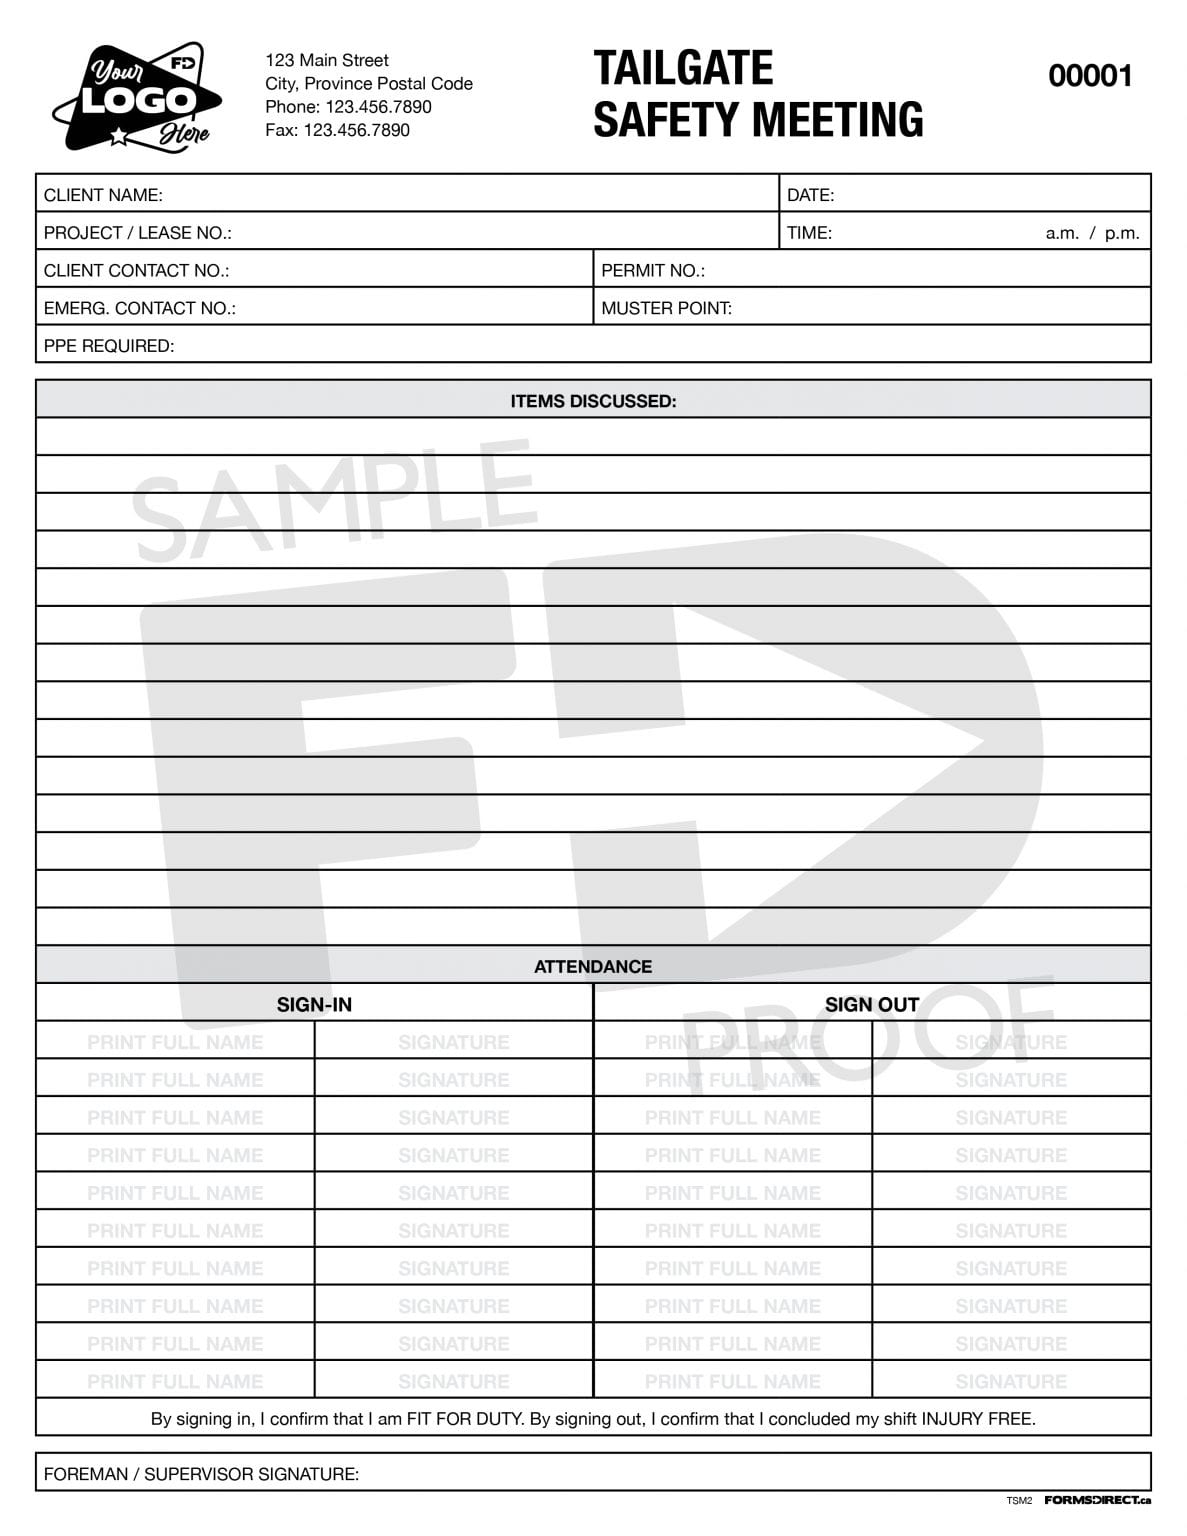 record-of-safety-meeting-tailgate-rsm1-form-template-forms-direct